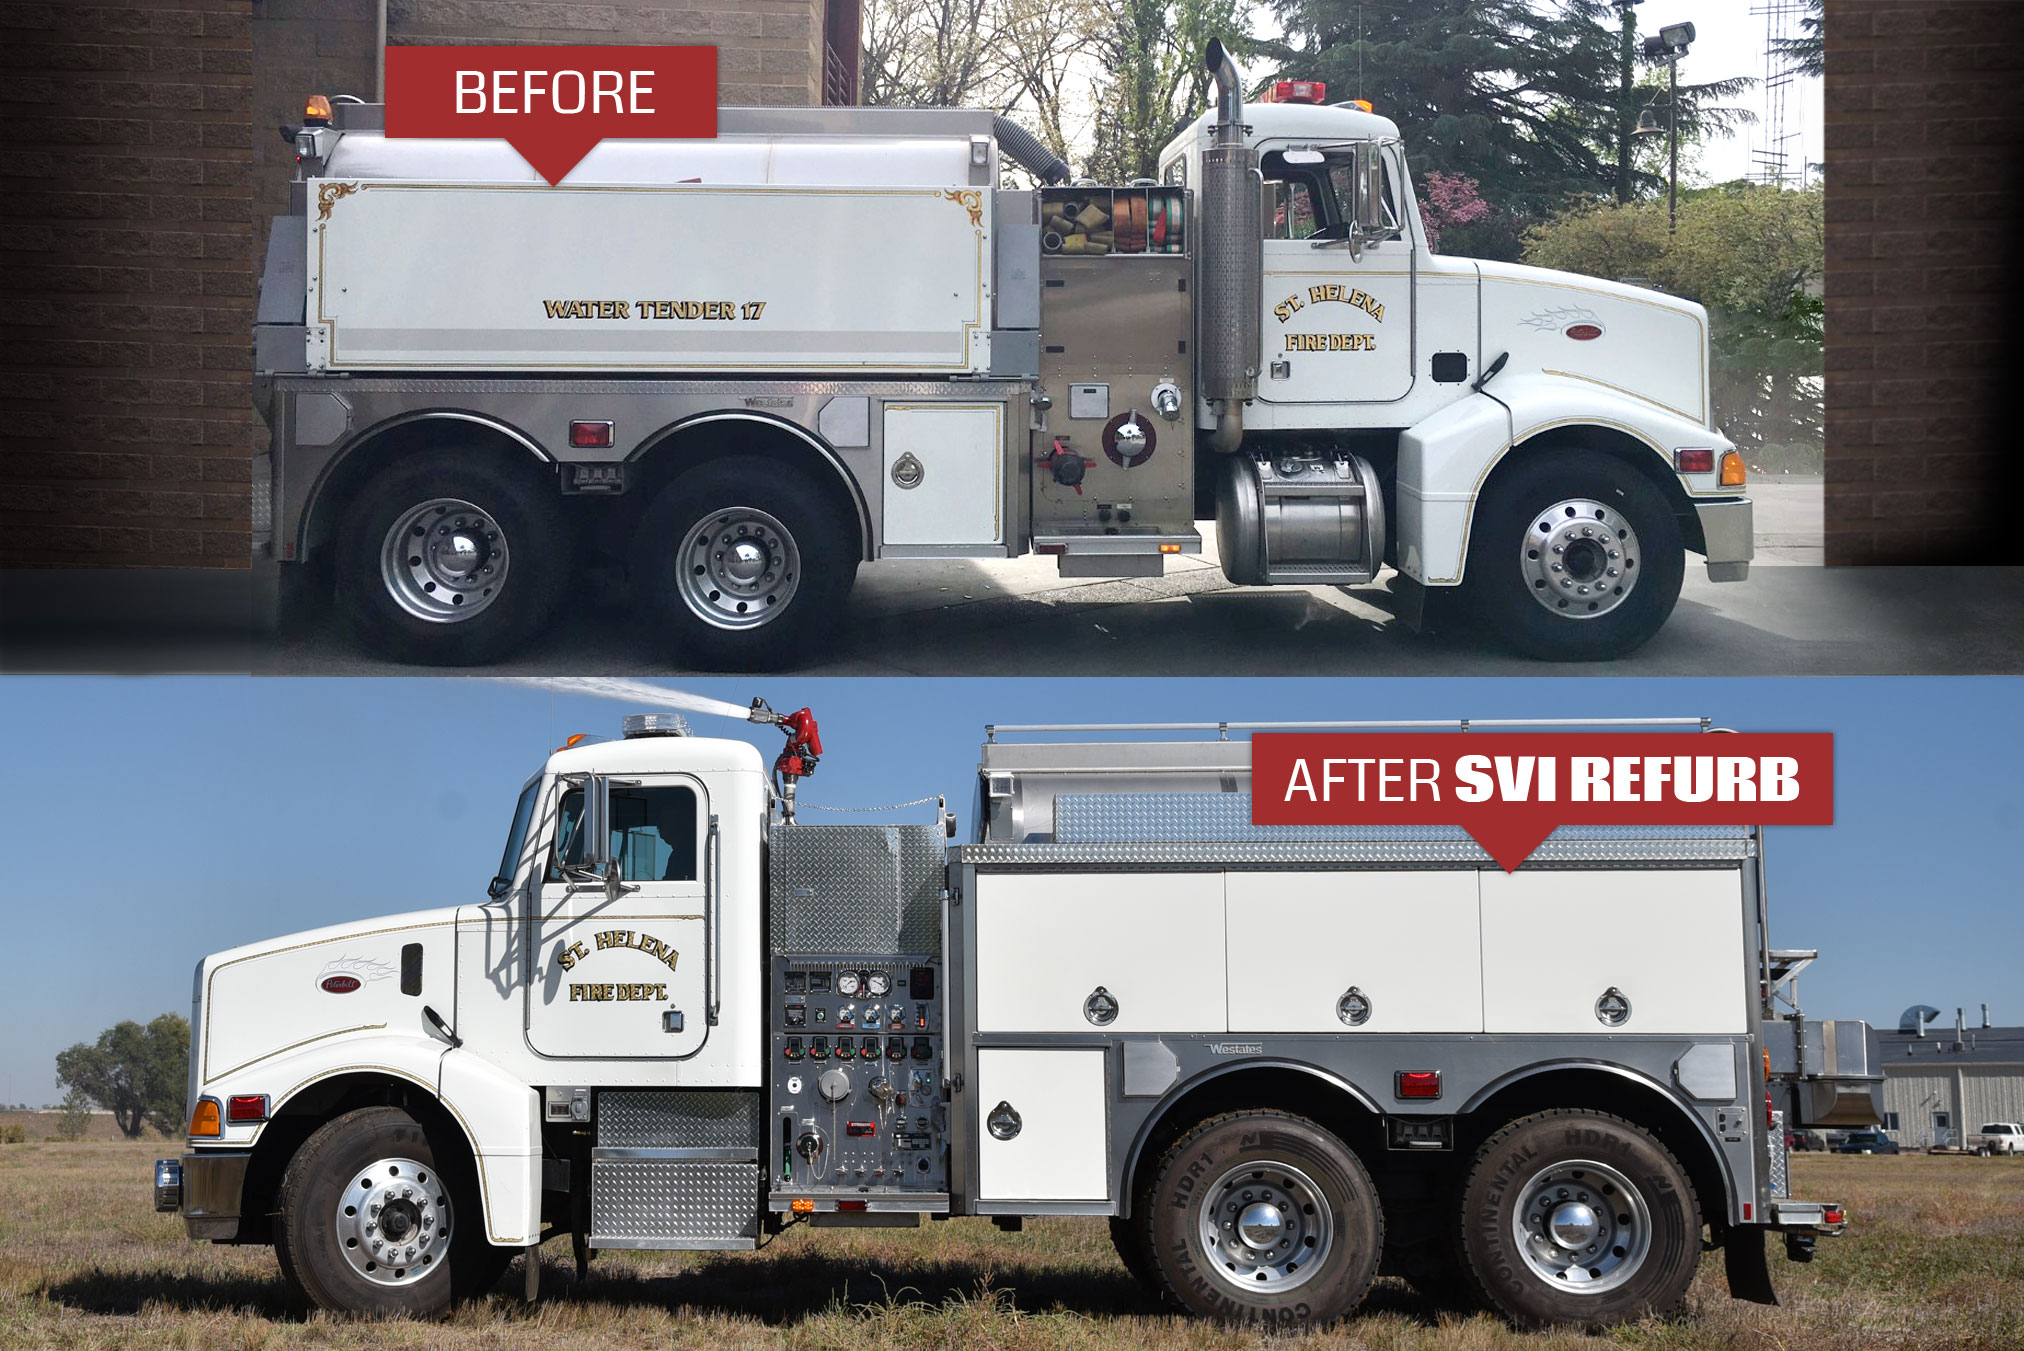 Featured image for “St. Helena Fire Department Tender Refurb”